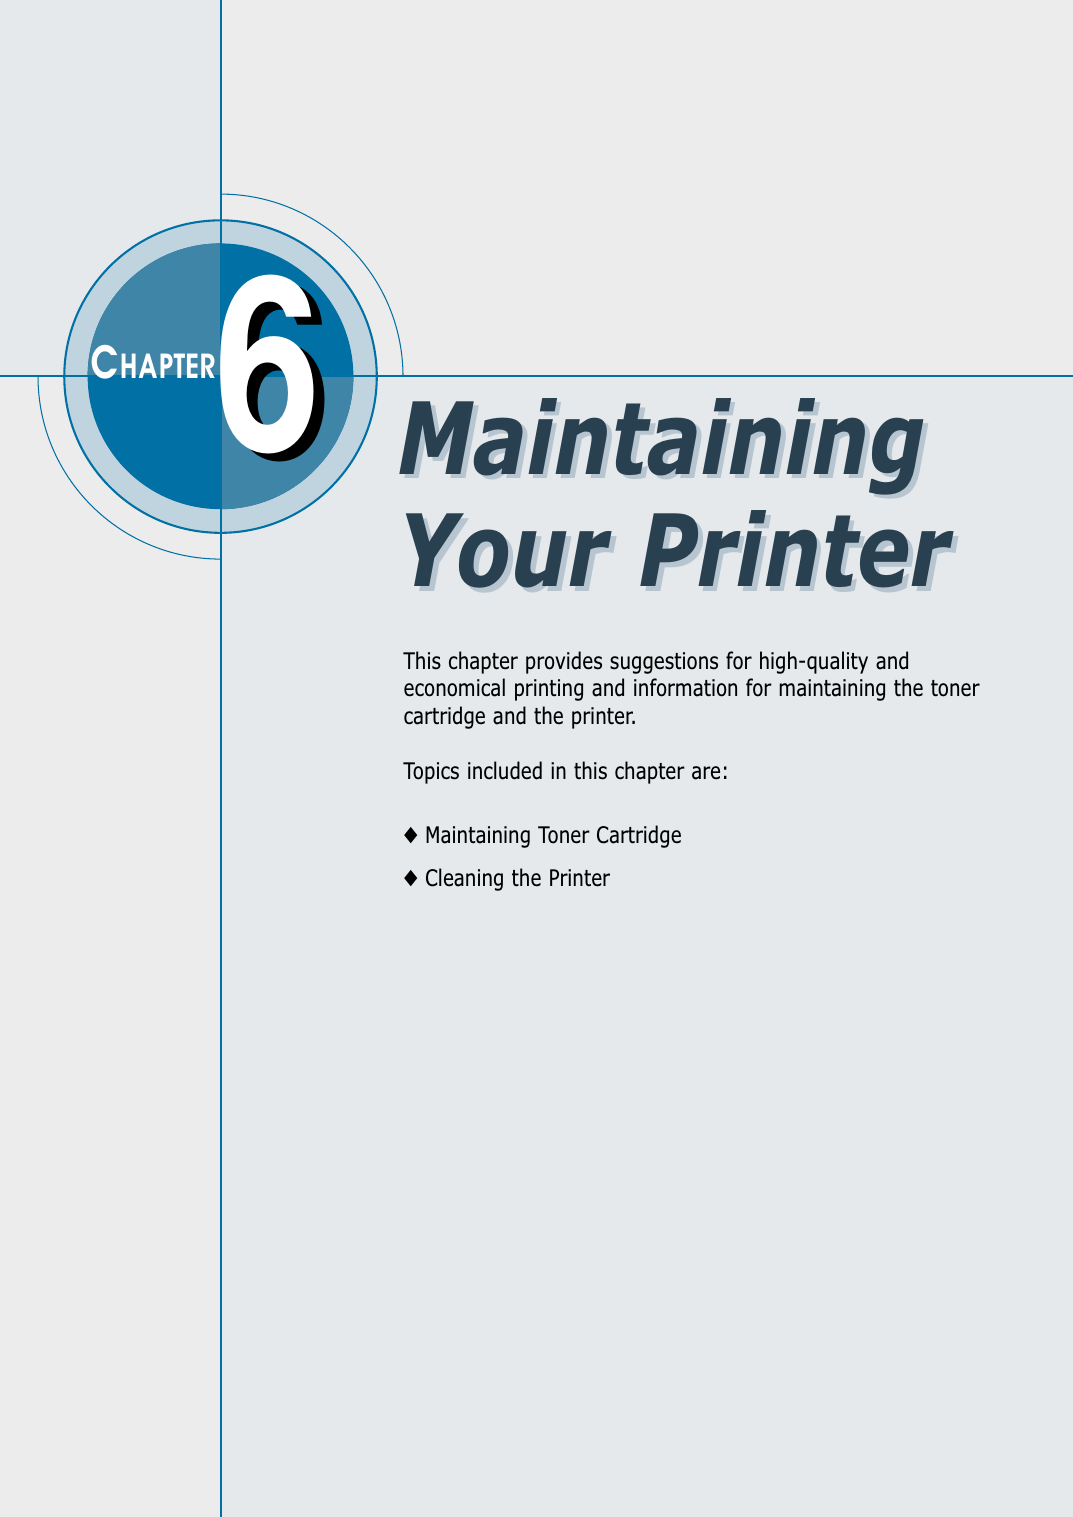 This chapter provides suggestions for high-quality andeconomical printing and information for maintaining the tonercartridge and the printer. Topics included in this chapter are:◆Maintaining Toner Cartridge◆Cleaning the Printer66CHAPTERMaintainingYour PrinterMaintainingYour Printer